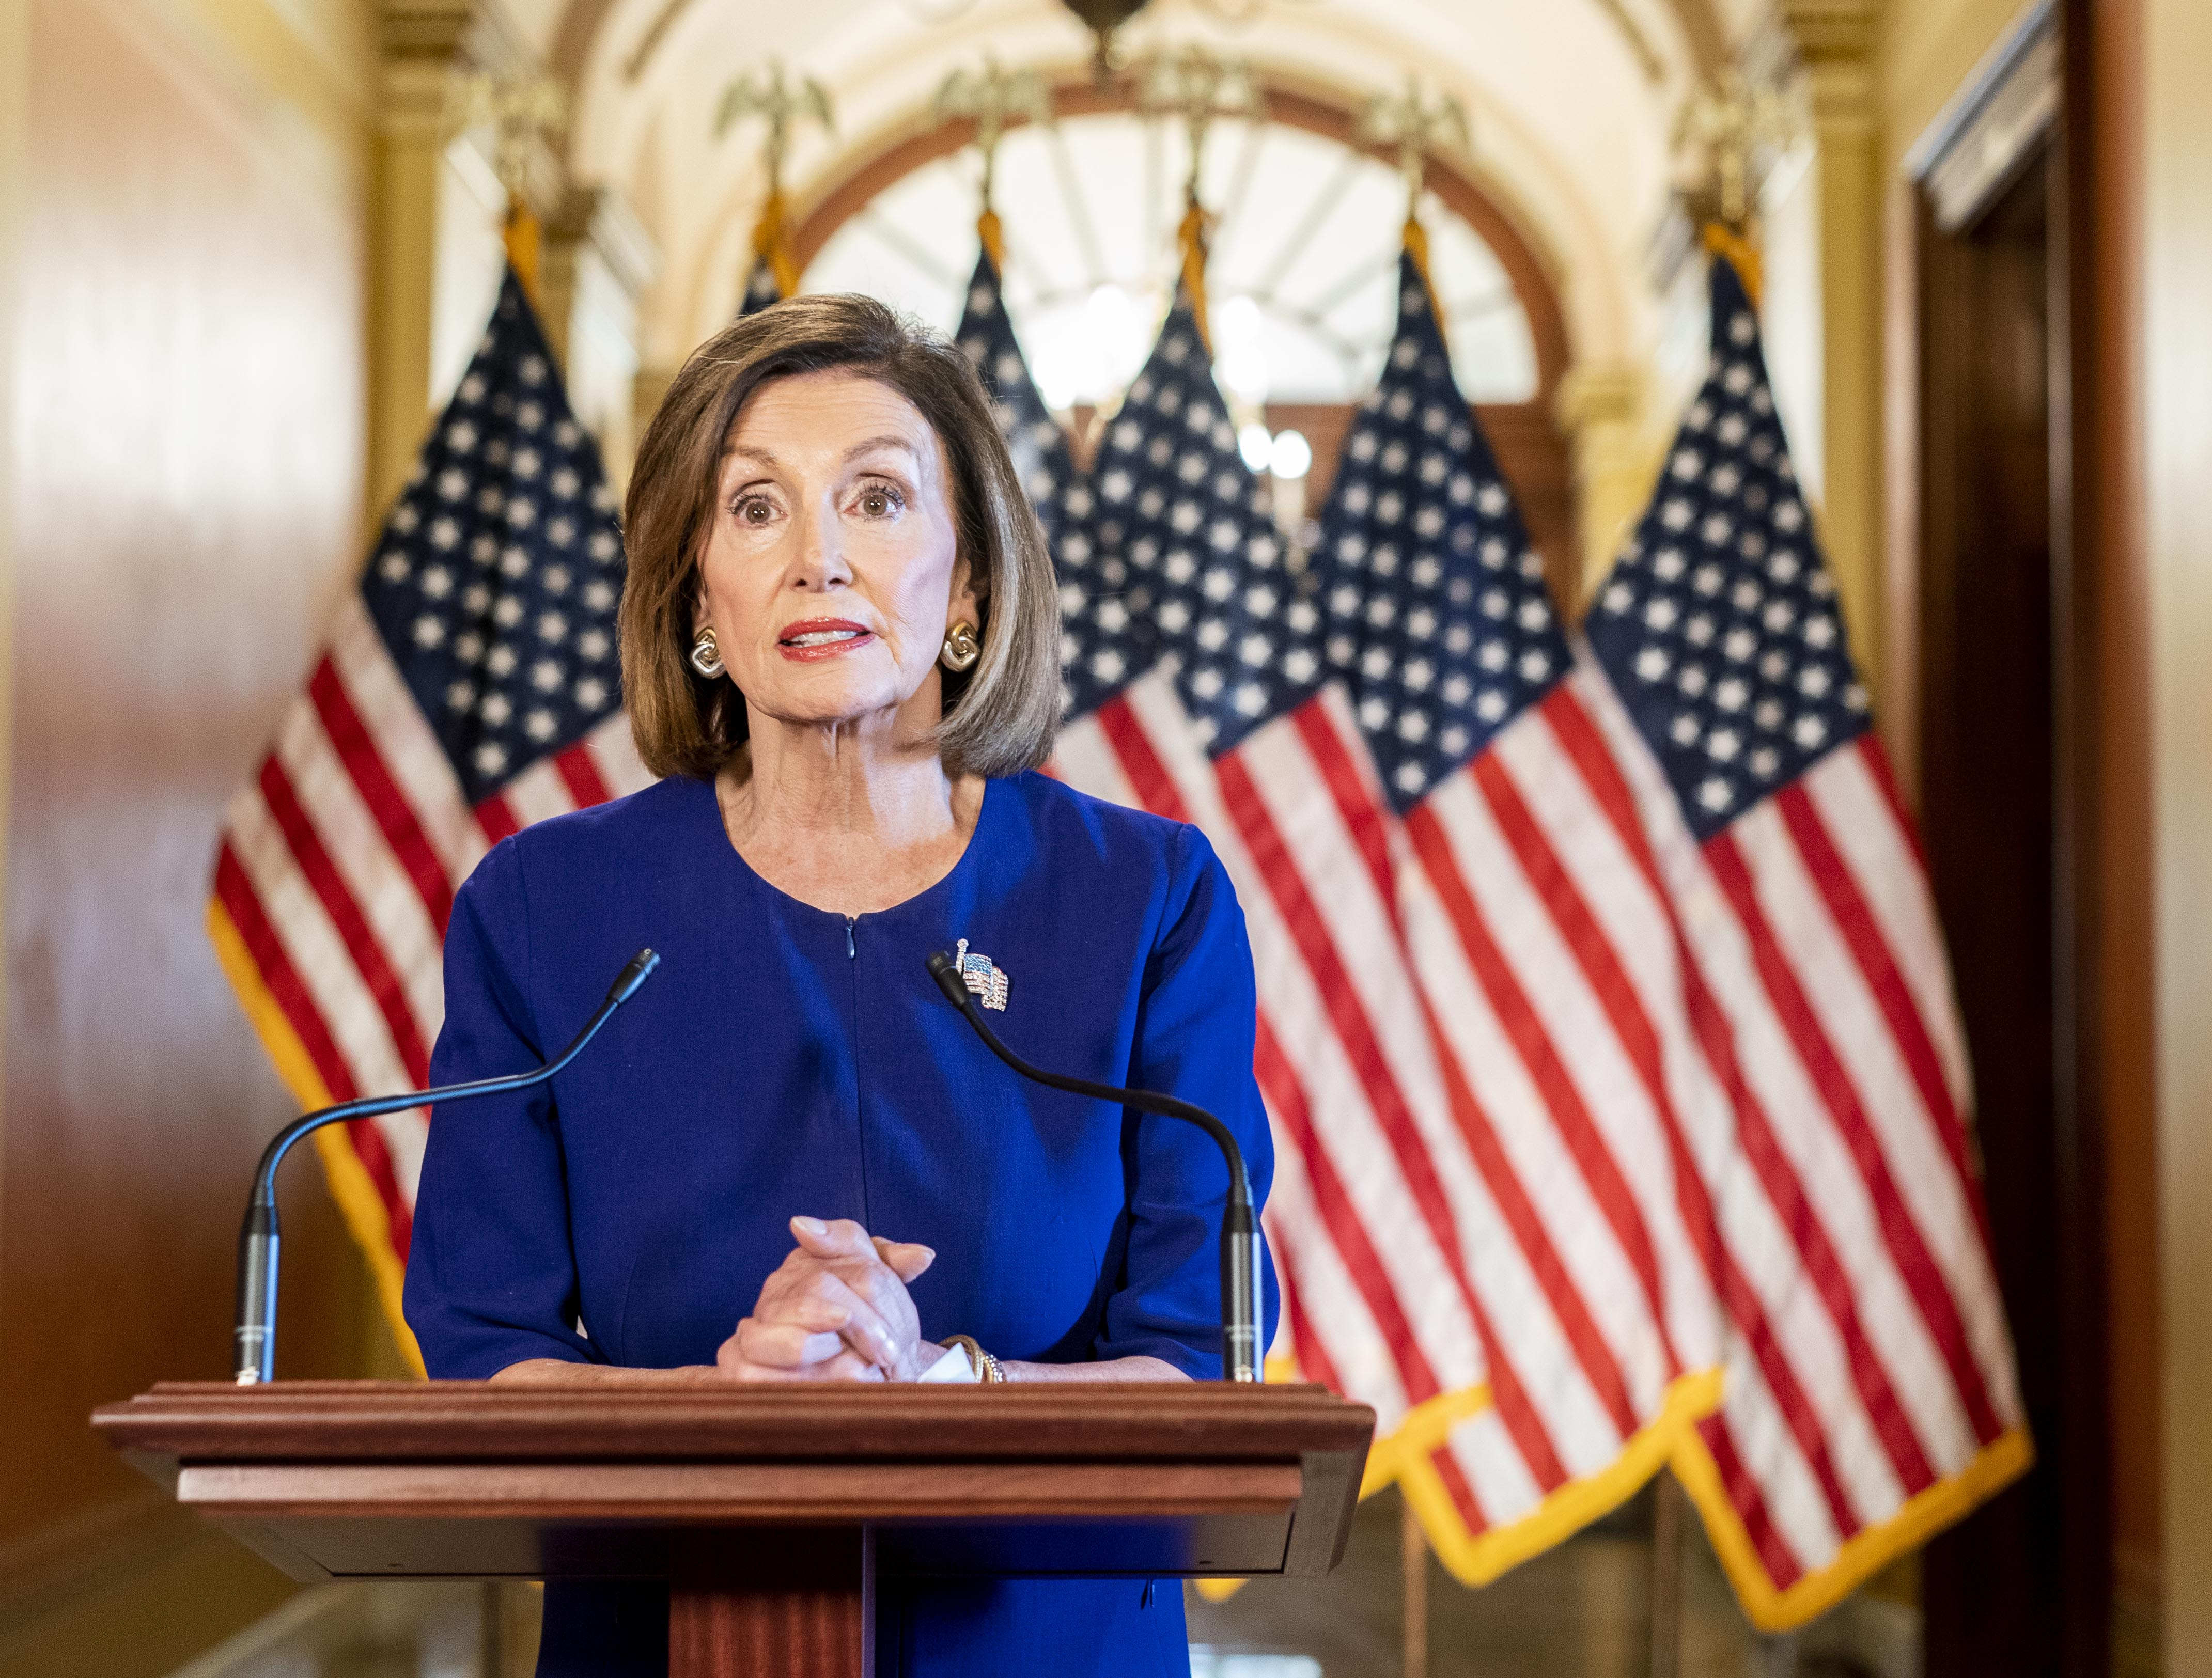 WASHINGTON, DC - September 24: From the Speaker's Balcony hallway, Speaker of the House Nancy Pelosi delivers a speech concerning a formal impeachment inquiry into President Donald Trump on Capitol Hill in Washington, DC on Tuesday September 24, 2019. (The Washington Post—The Washington Post/Getty Images)